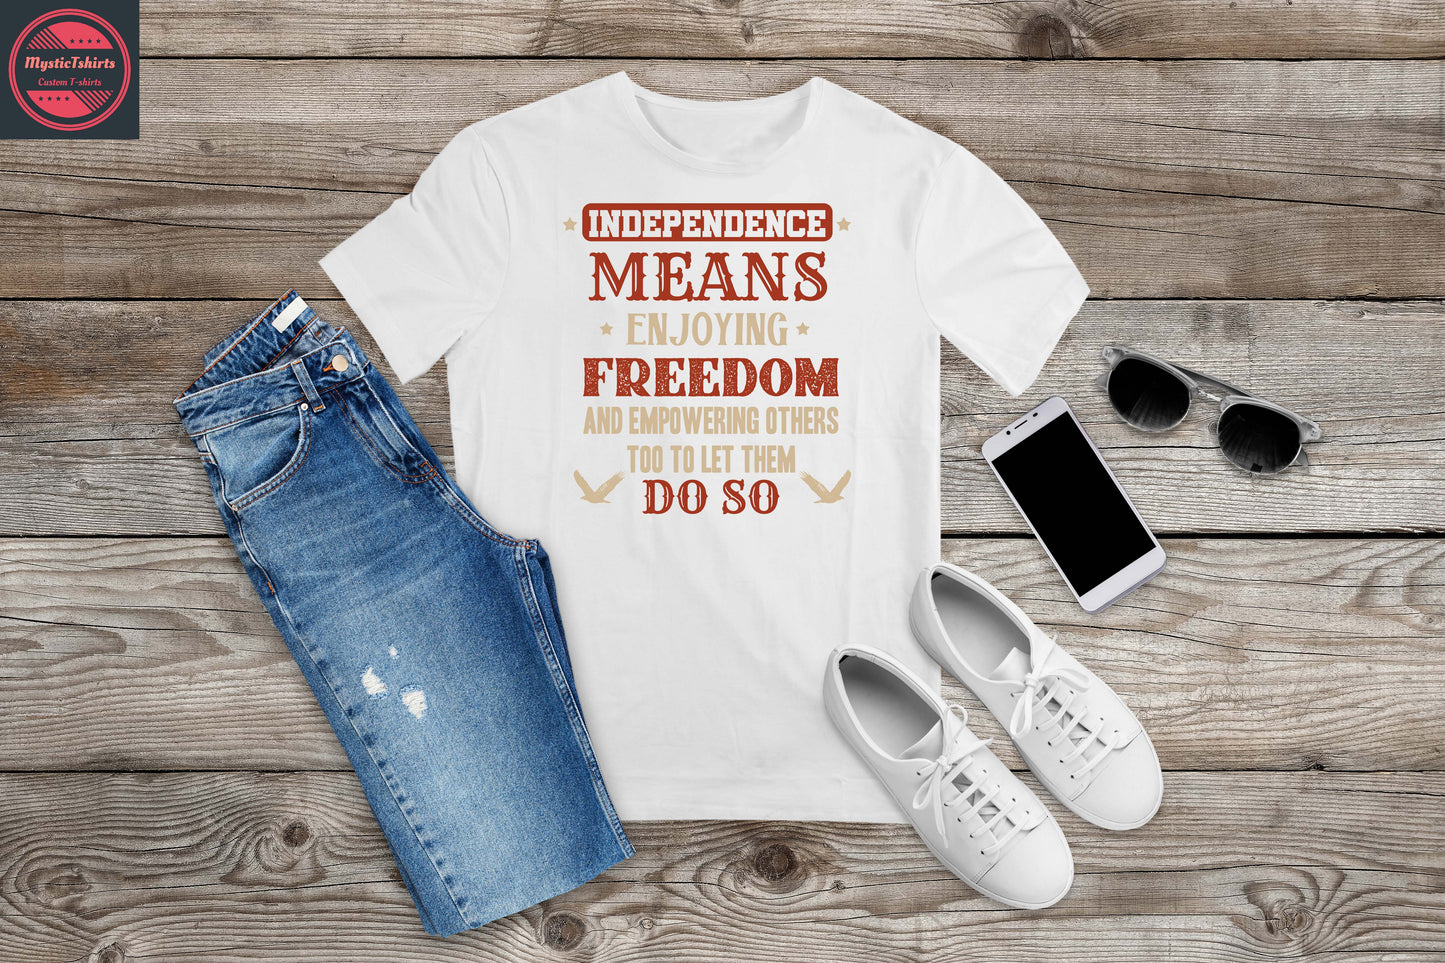 243. INDEPENDENCE MEANS, Custom Made Shirt, Personalized T-Shirt, Custom Text, Make Your Own Shirt, Custom Tee